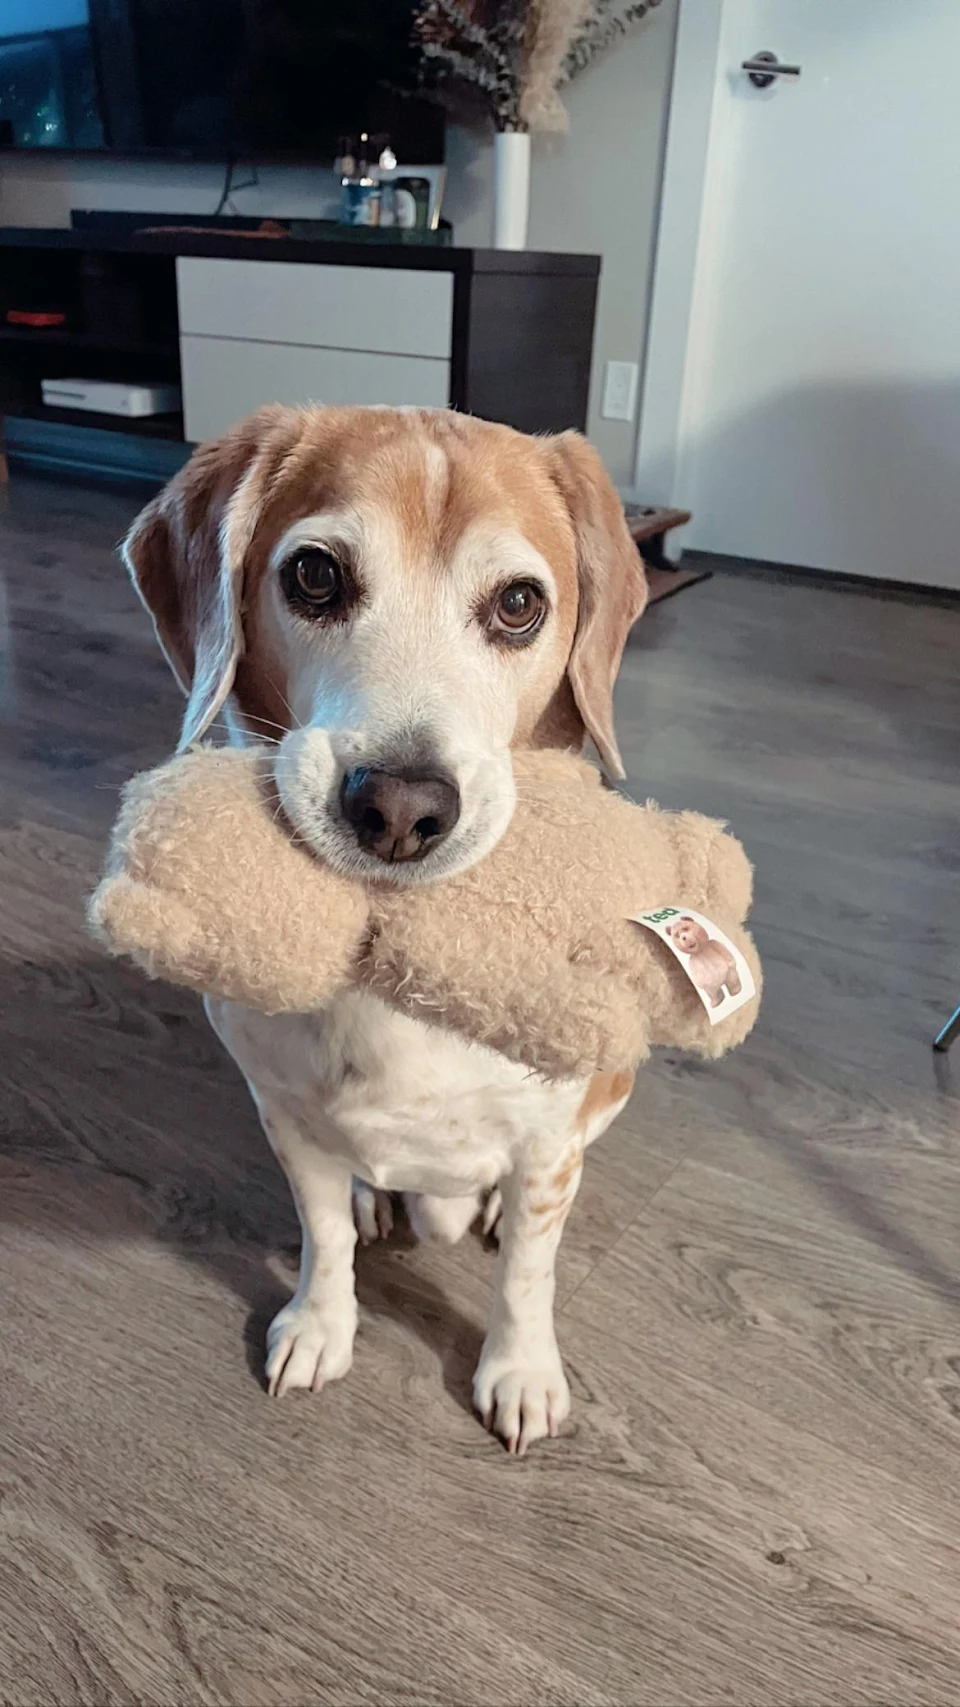 my 9 y/o beagle with his Ted bear